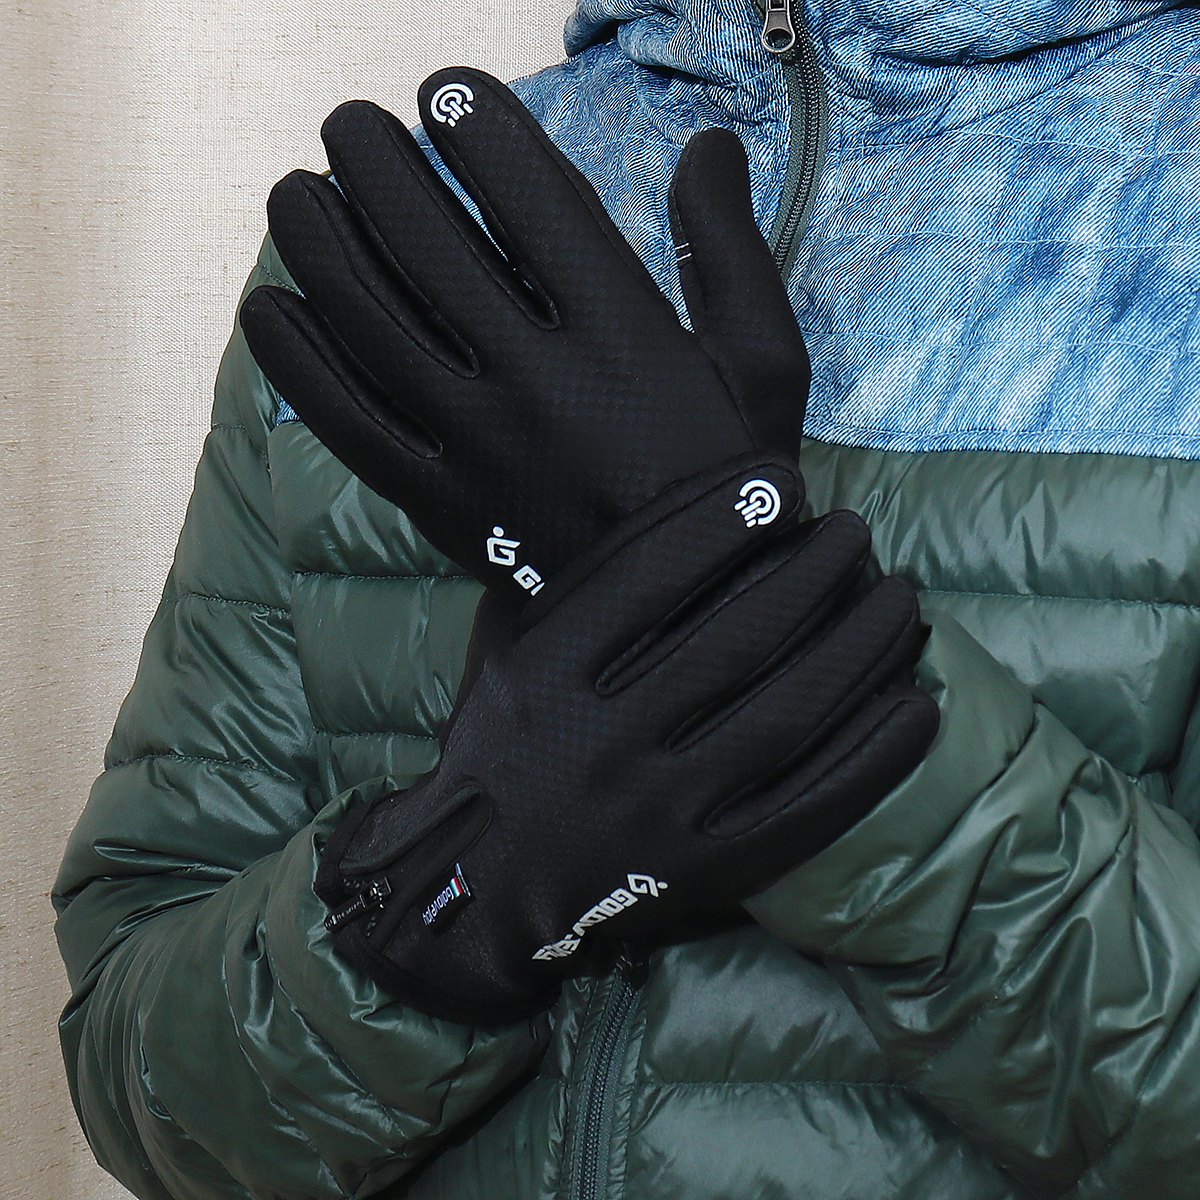 Windstopers-Skiing-Gloves-Anti-Slip-Touchscreen-Breathable-Water-Repellent-Zipper-Warm-Glove-1580293-10